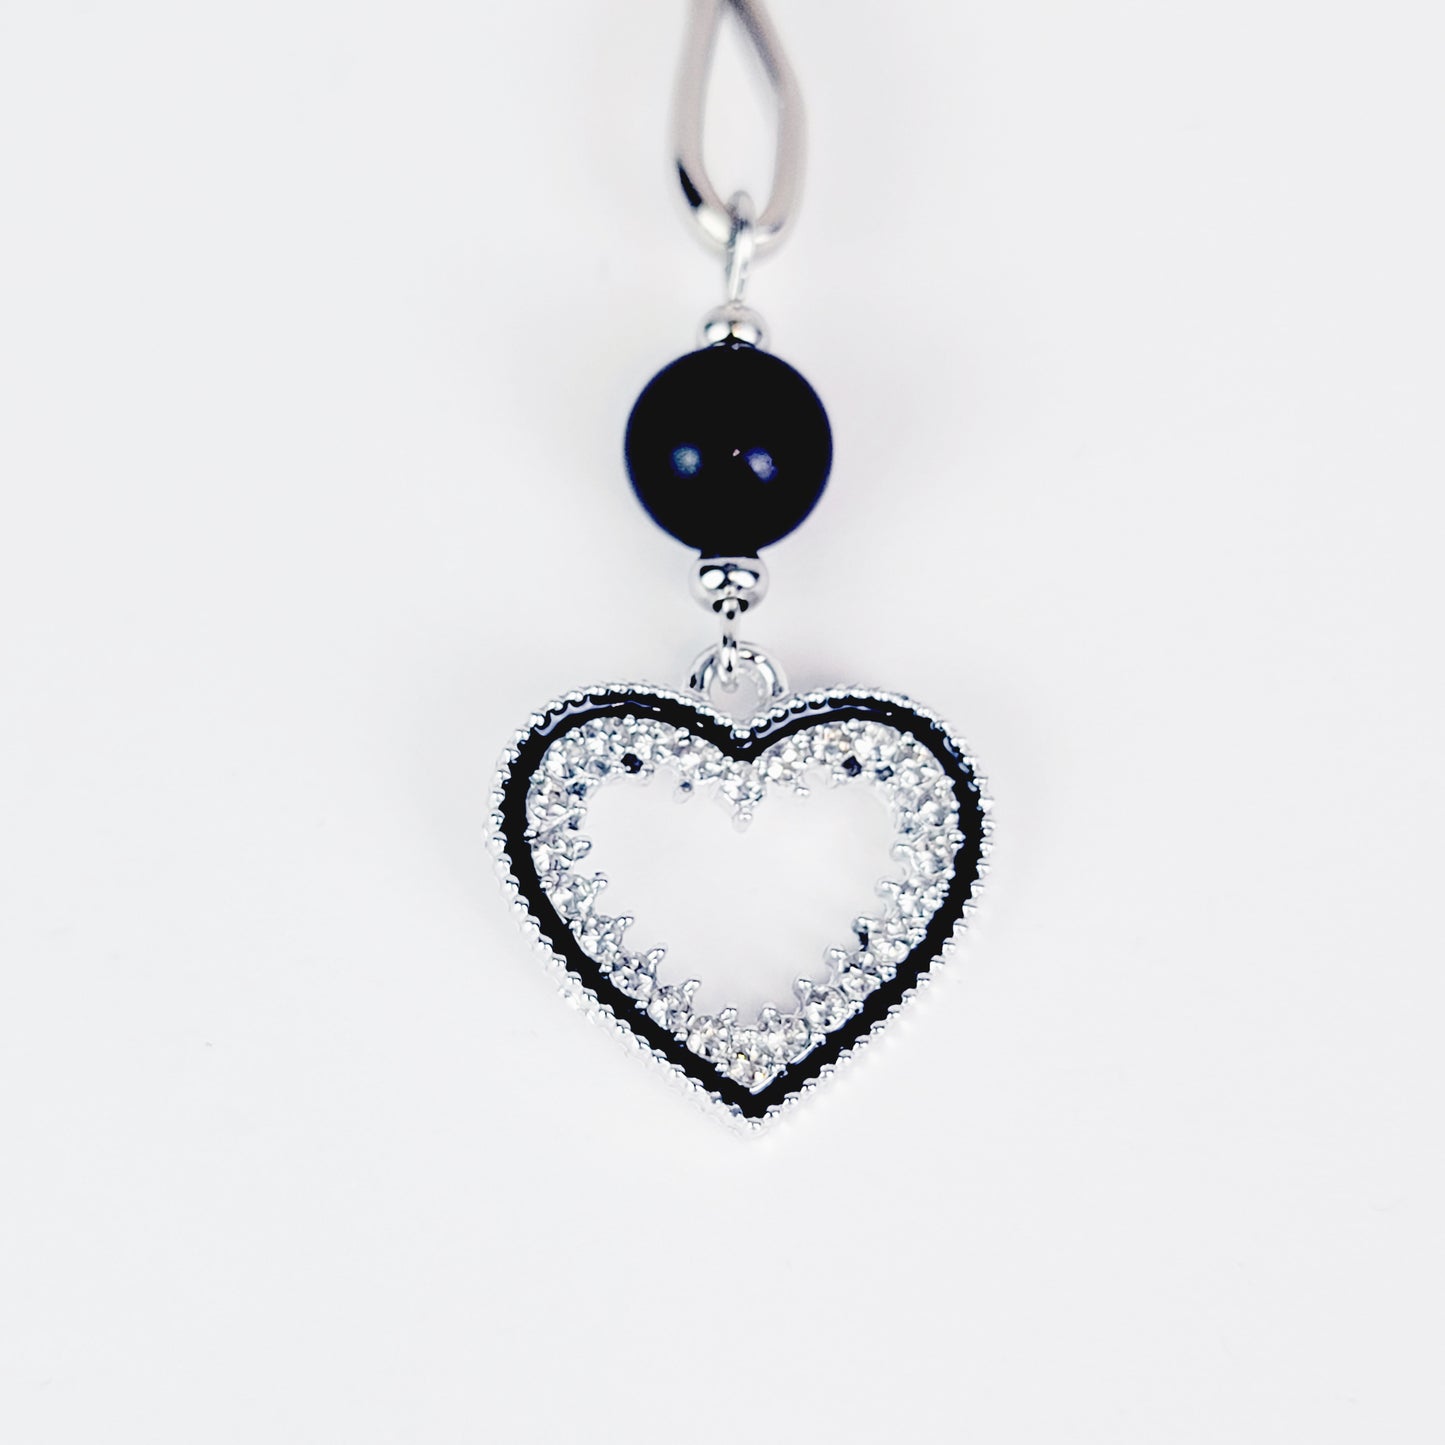 Tweezer Clit Clamp with Sparkling Heart and Black Obsidian. Clitoral Clamp For BDSM Submissive Women.